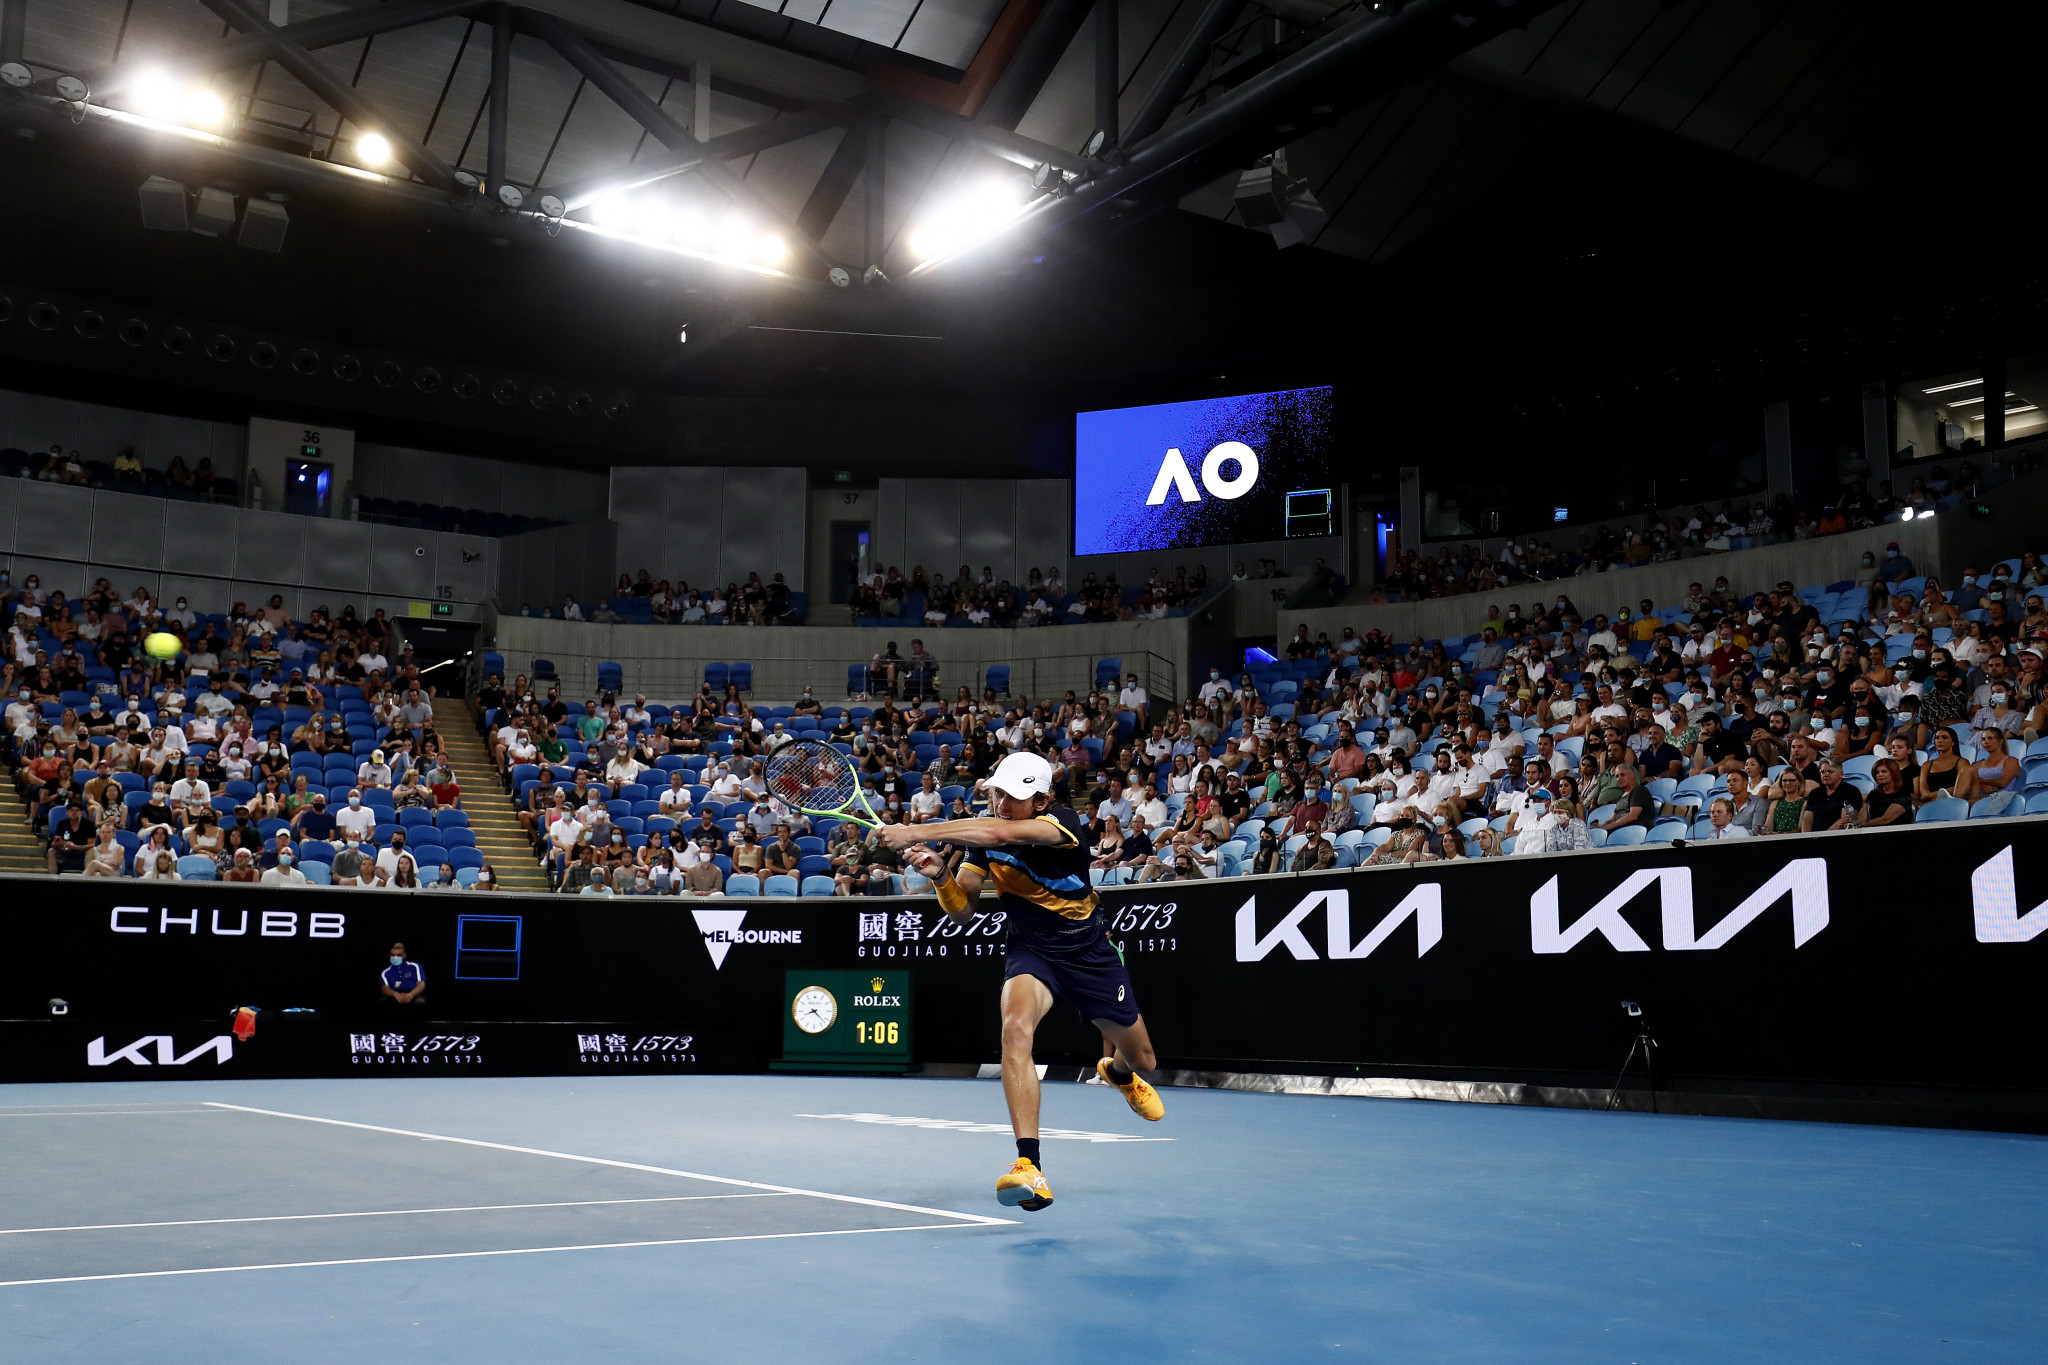 A total of 1,200 players are taking part in the Australian Open after undergoing a strict 14-day quarantine period ©Getty Images